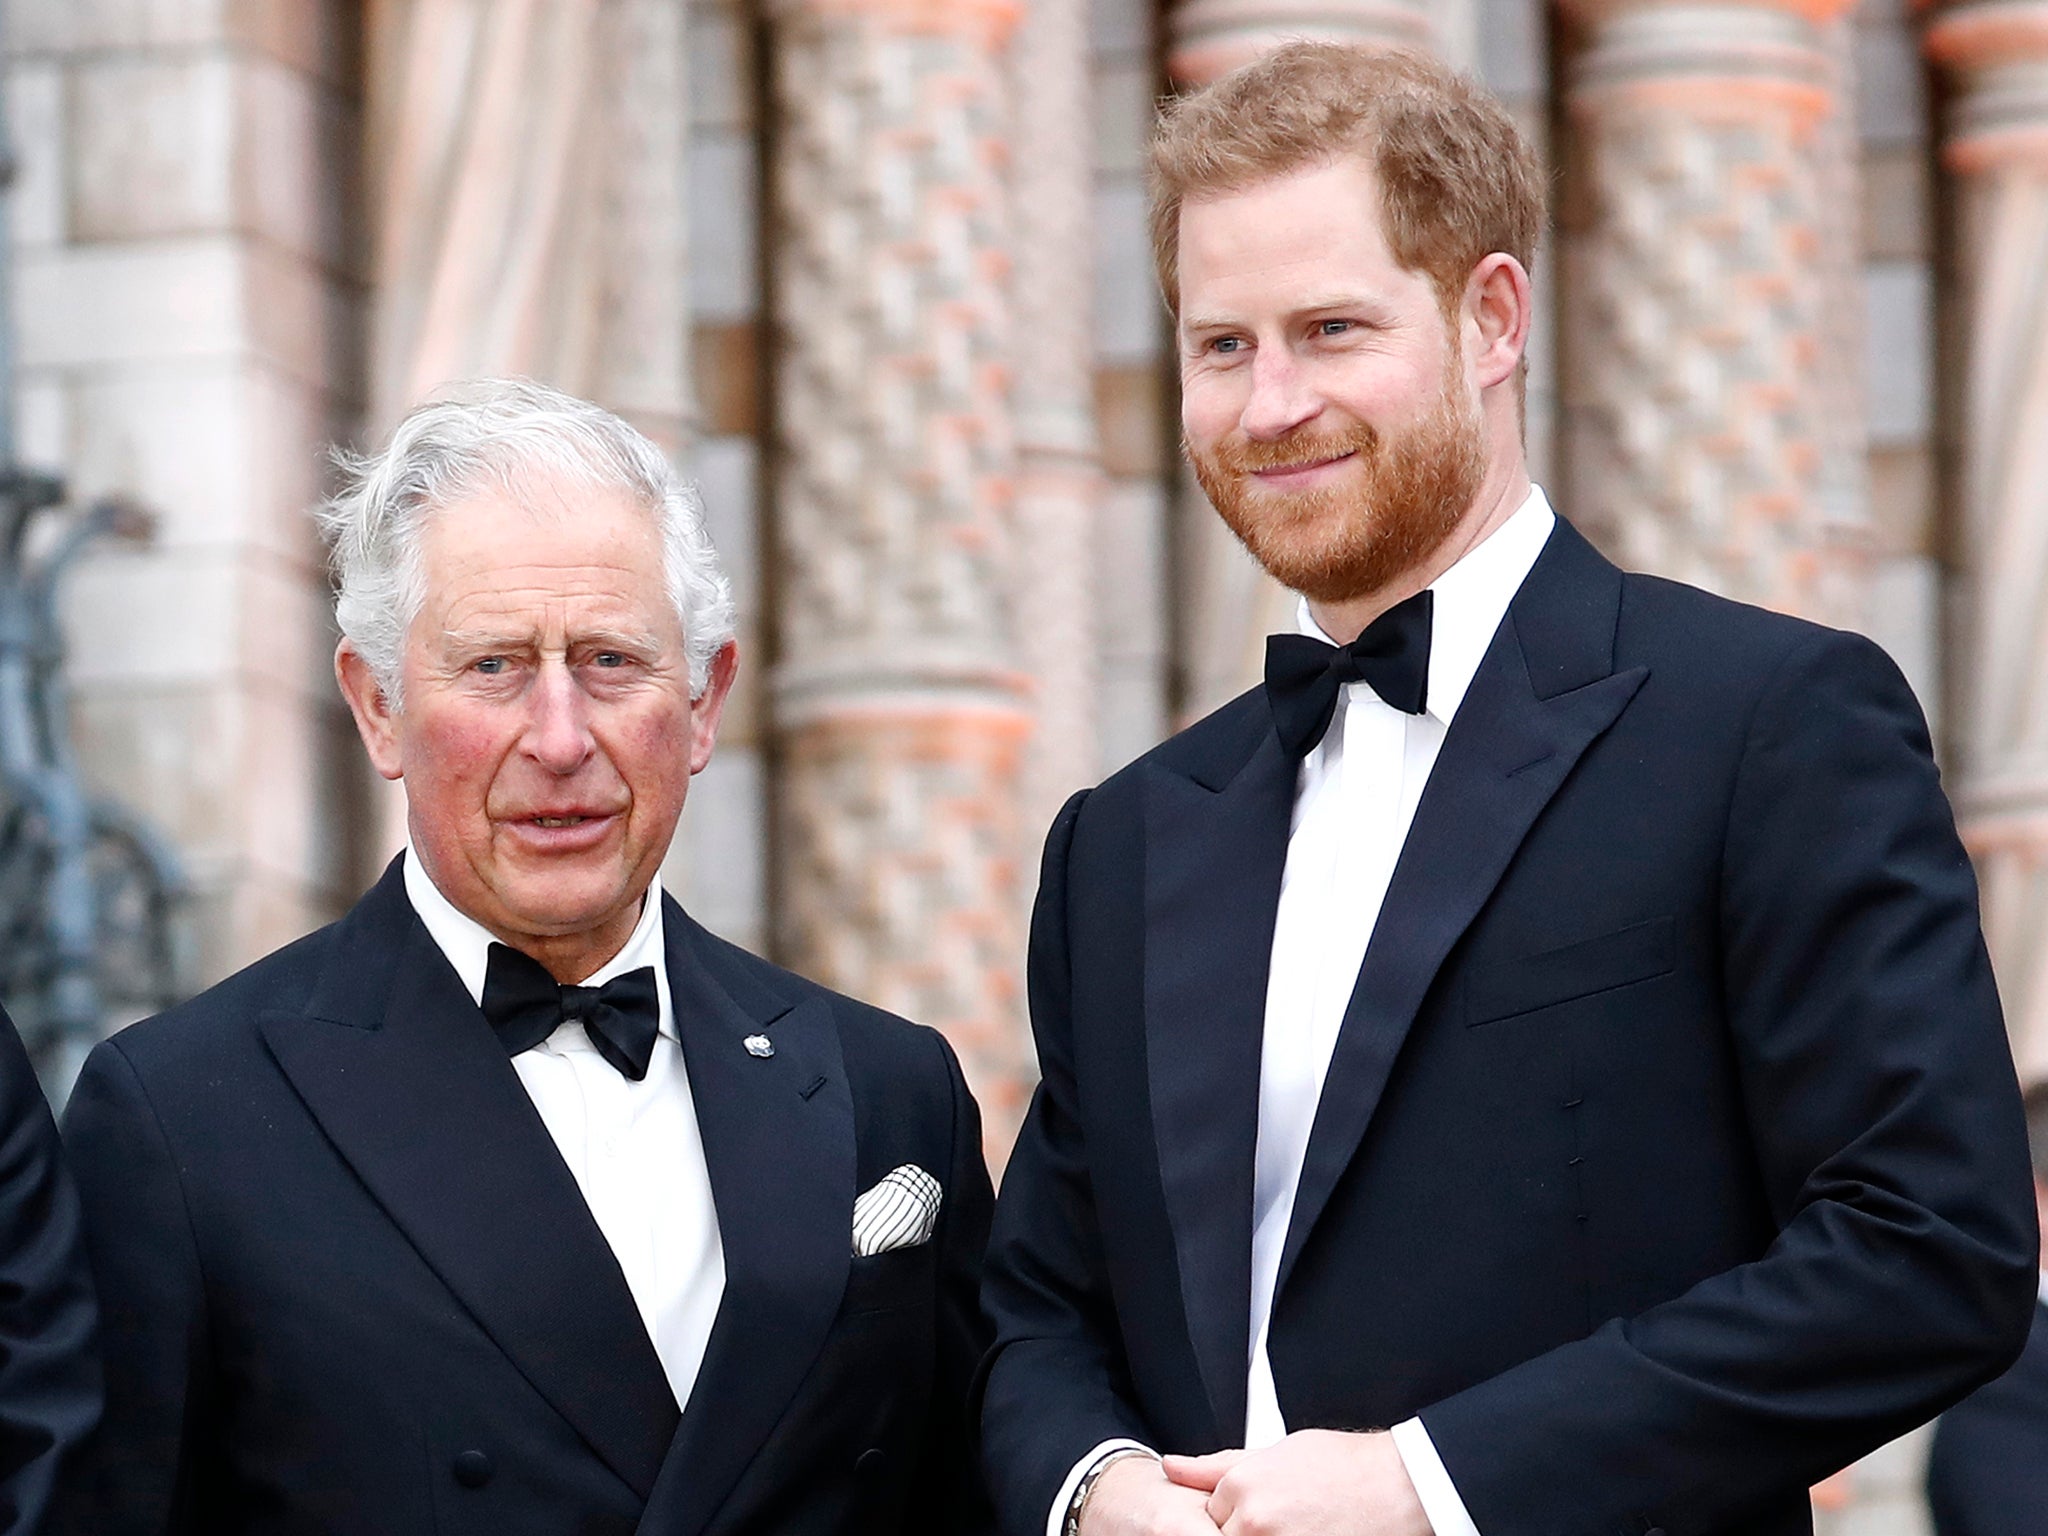 Prince Harry cleared his diary rushed back to the UK from his home in LA on Tuesday to spend time with his father despite the rift between them